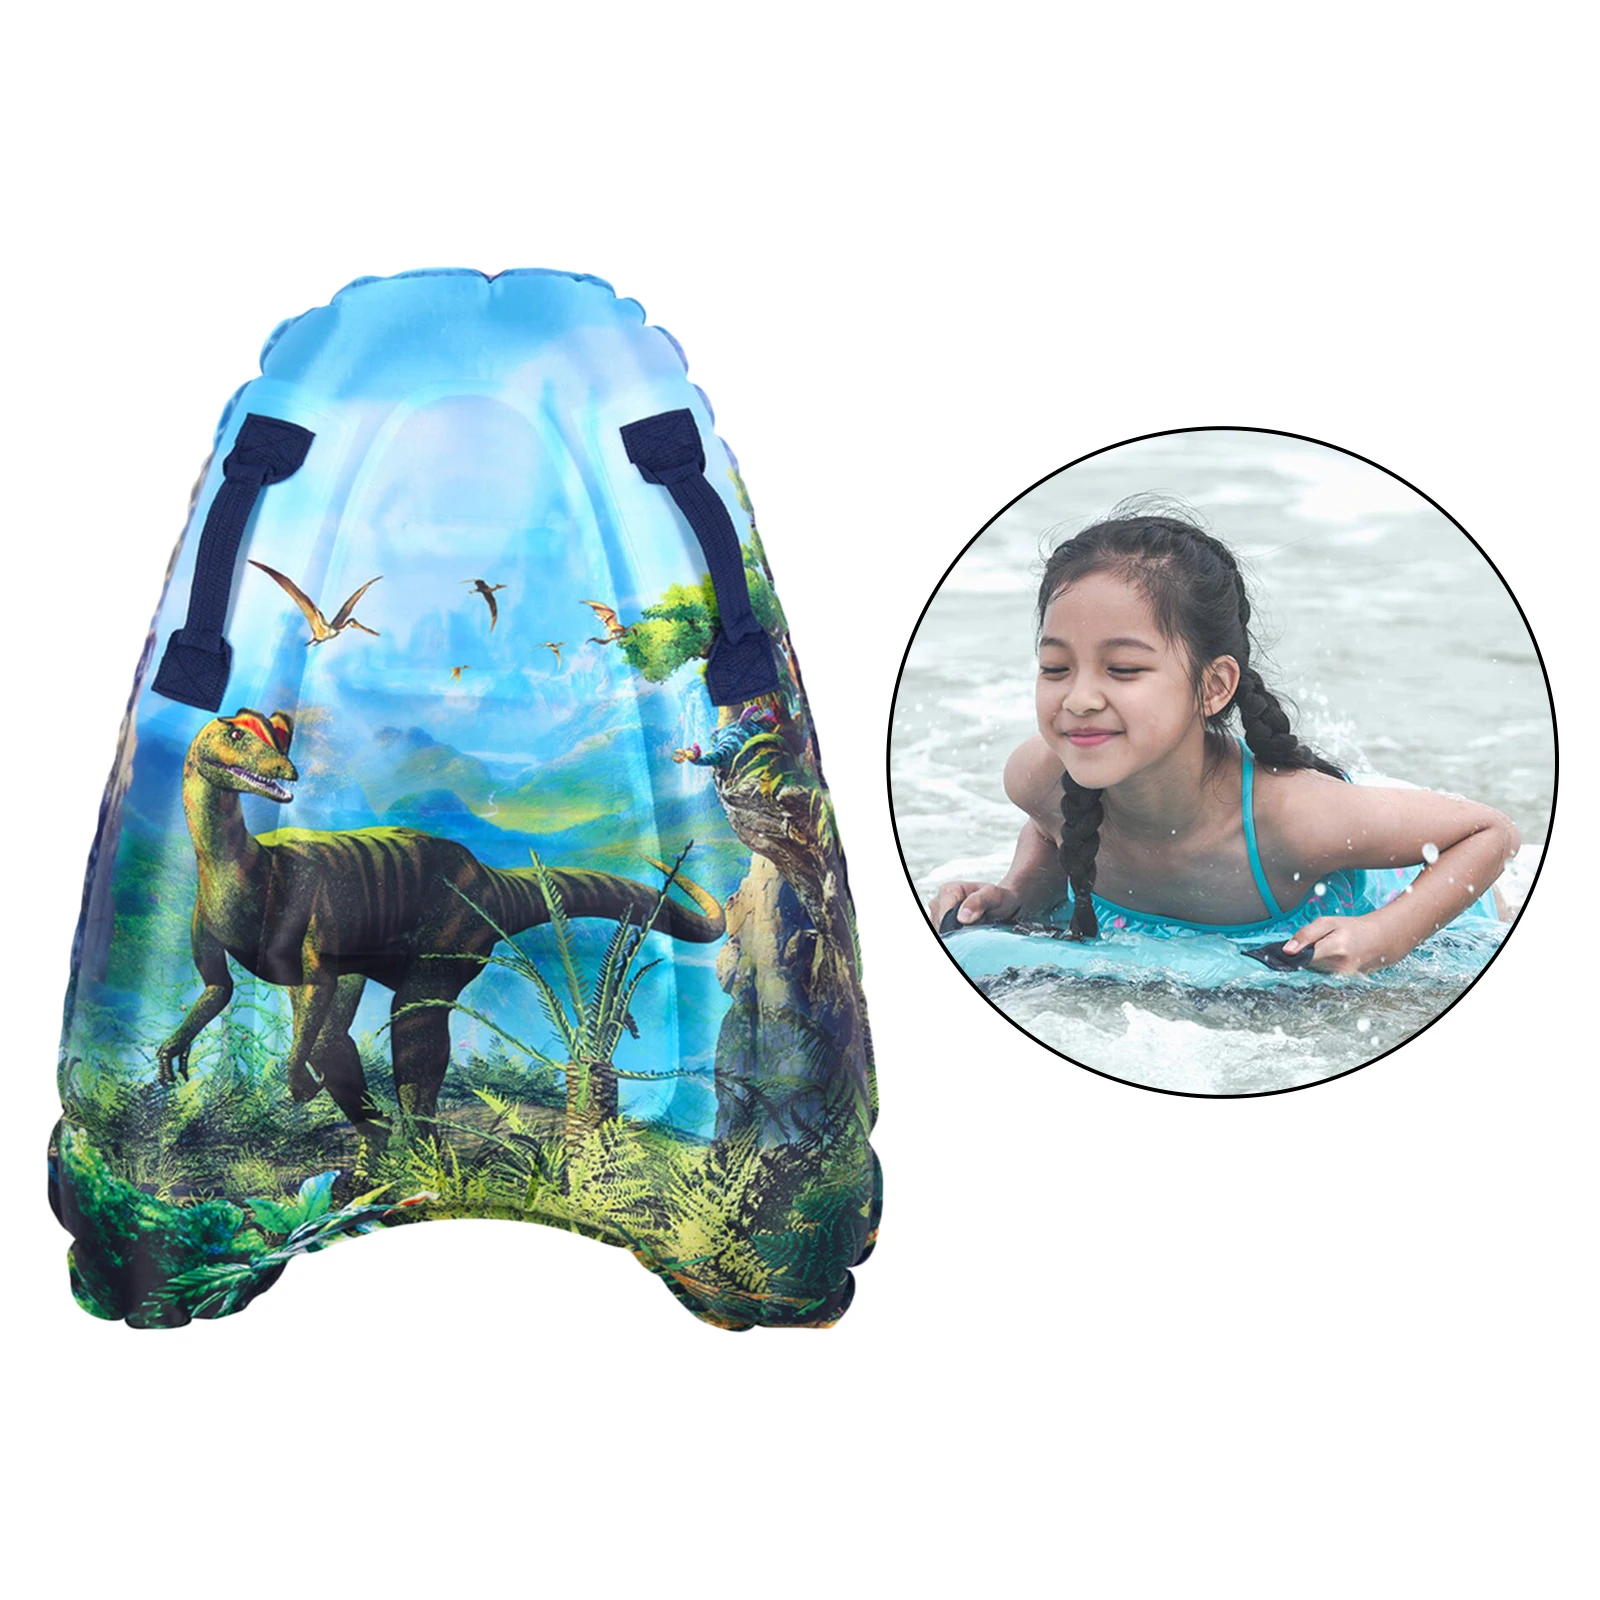 75x52cm Children Inflatable Bodyboards Kids Lightweight Soft Mini Surfboards Outdoor Swimming Pool Beach Floating Mat Pad Float